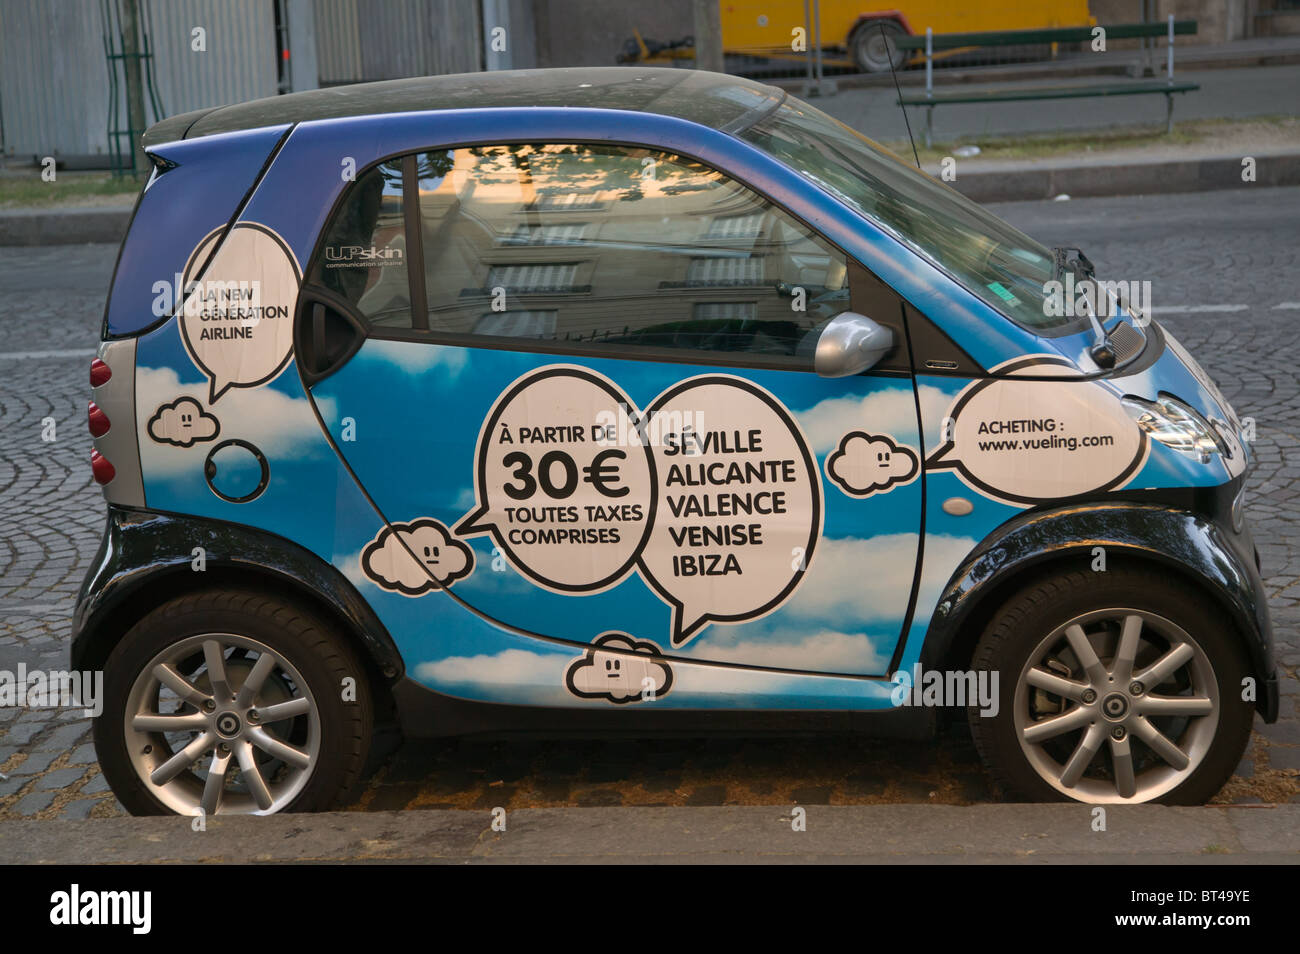 A Smart Car with advertising parked on the street in Paris, France Stock Photo